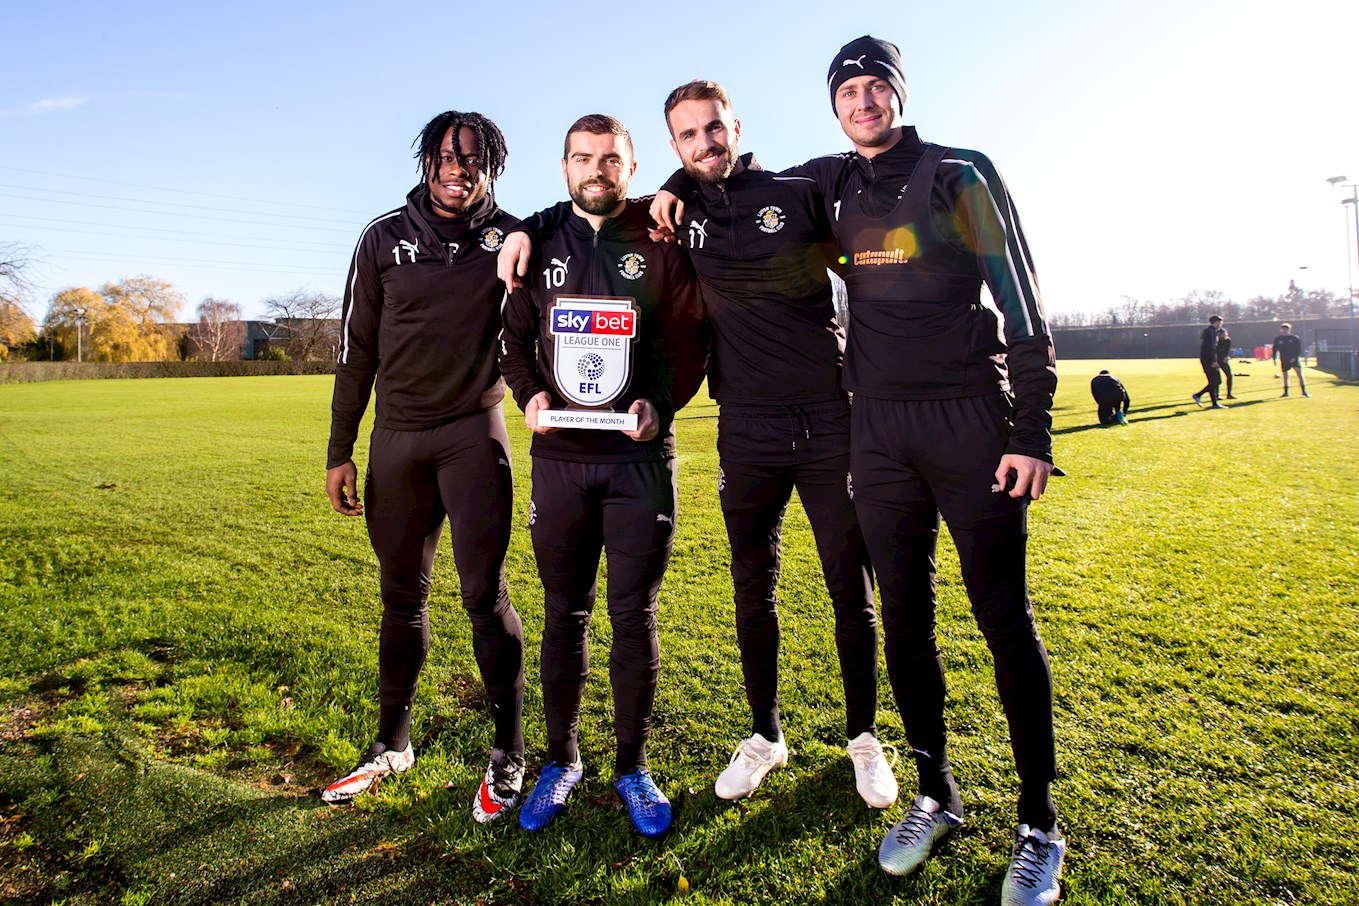 Hatters forward Elliot Lee is congratulated on his Sky Bet League One player of the month award for November by team-mates Pelly-Ruddock Mpanzu, Andrew Shinnie and Harry Cornick